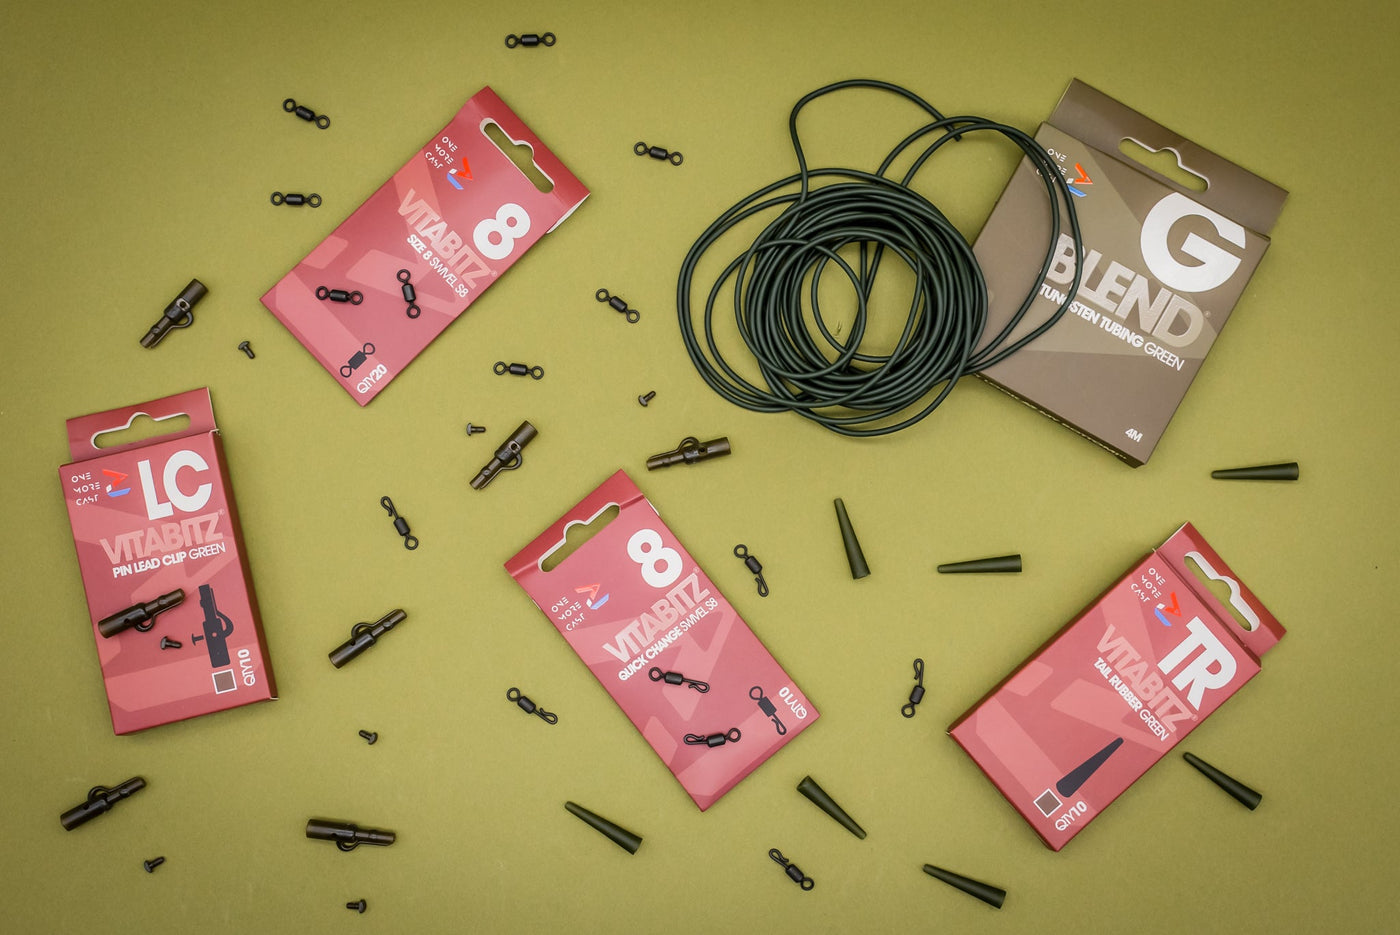 The Pin Lead Clip System Pack